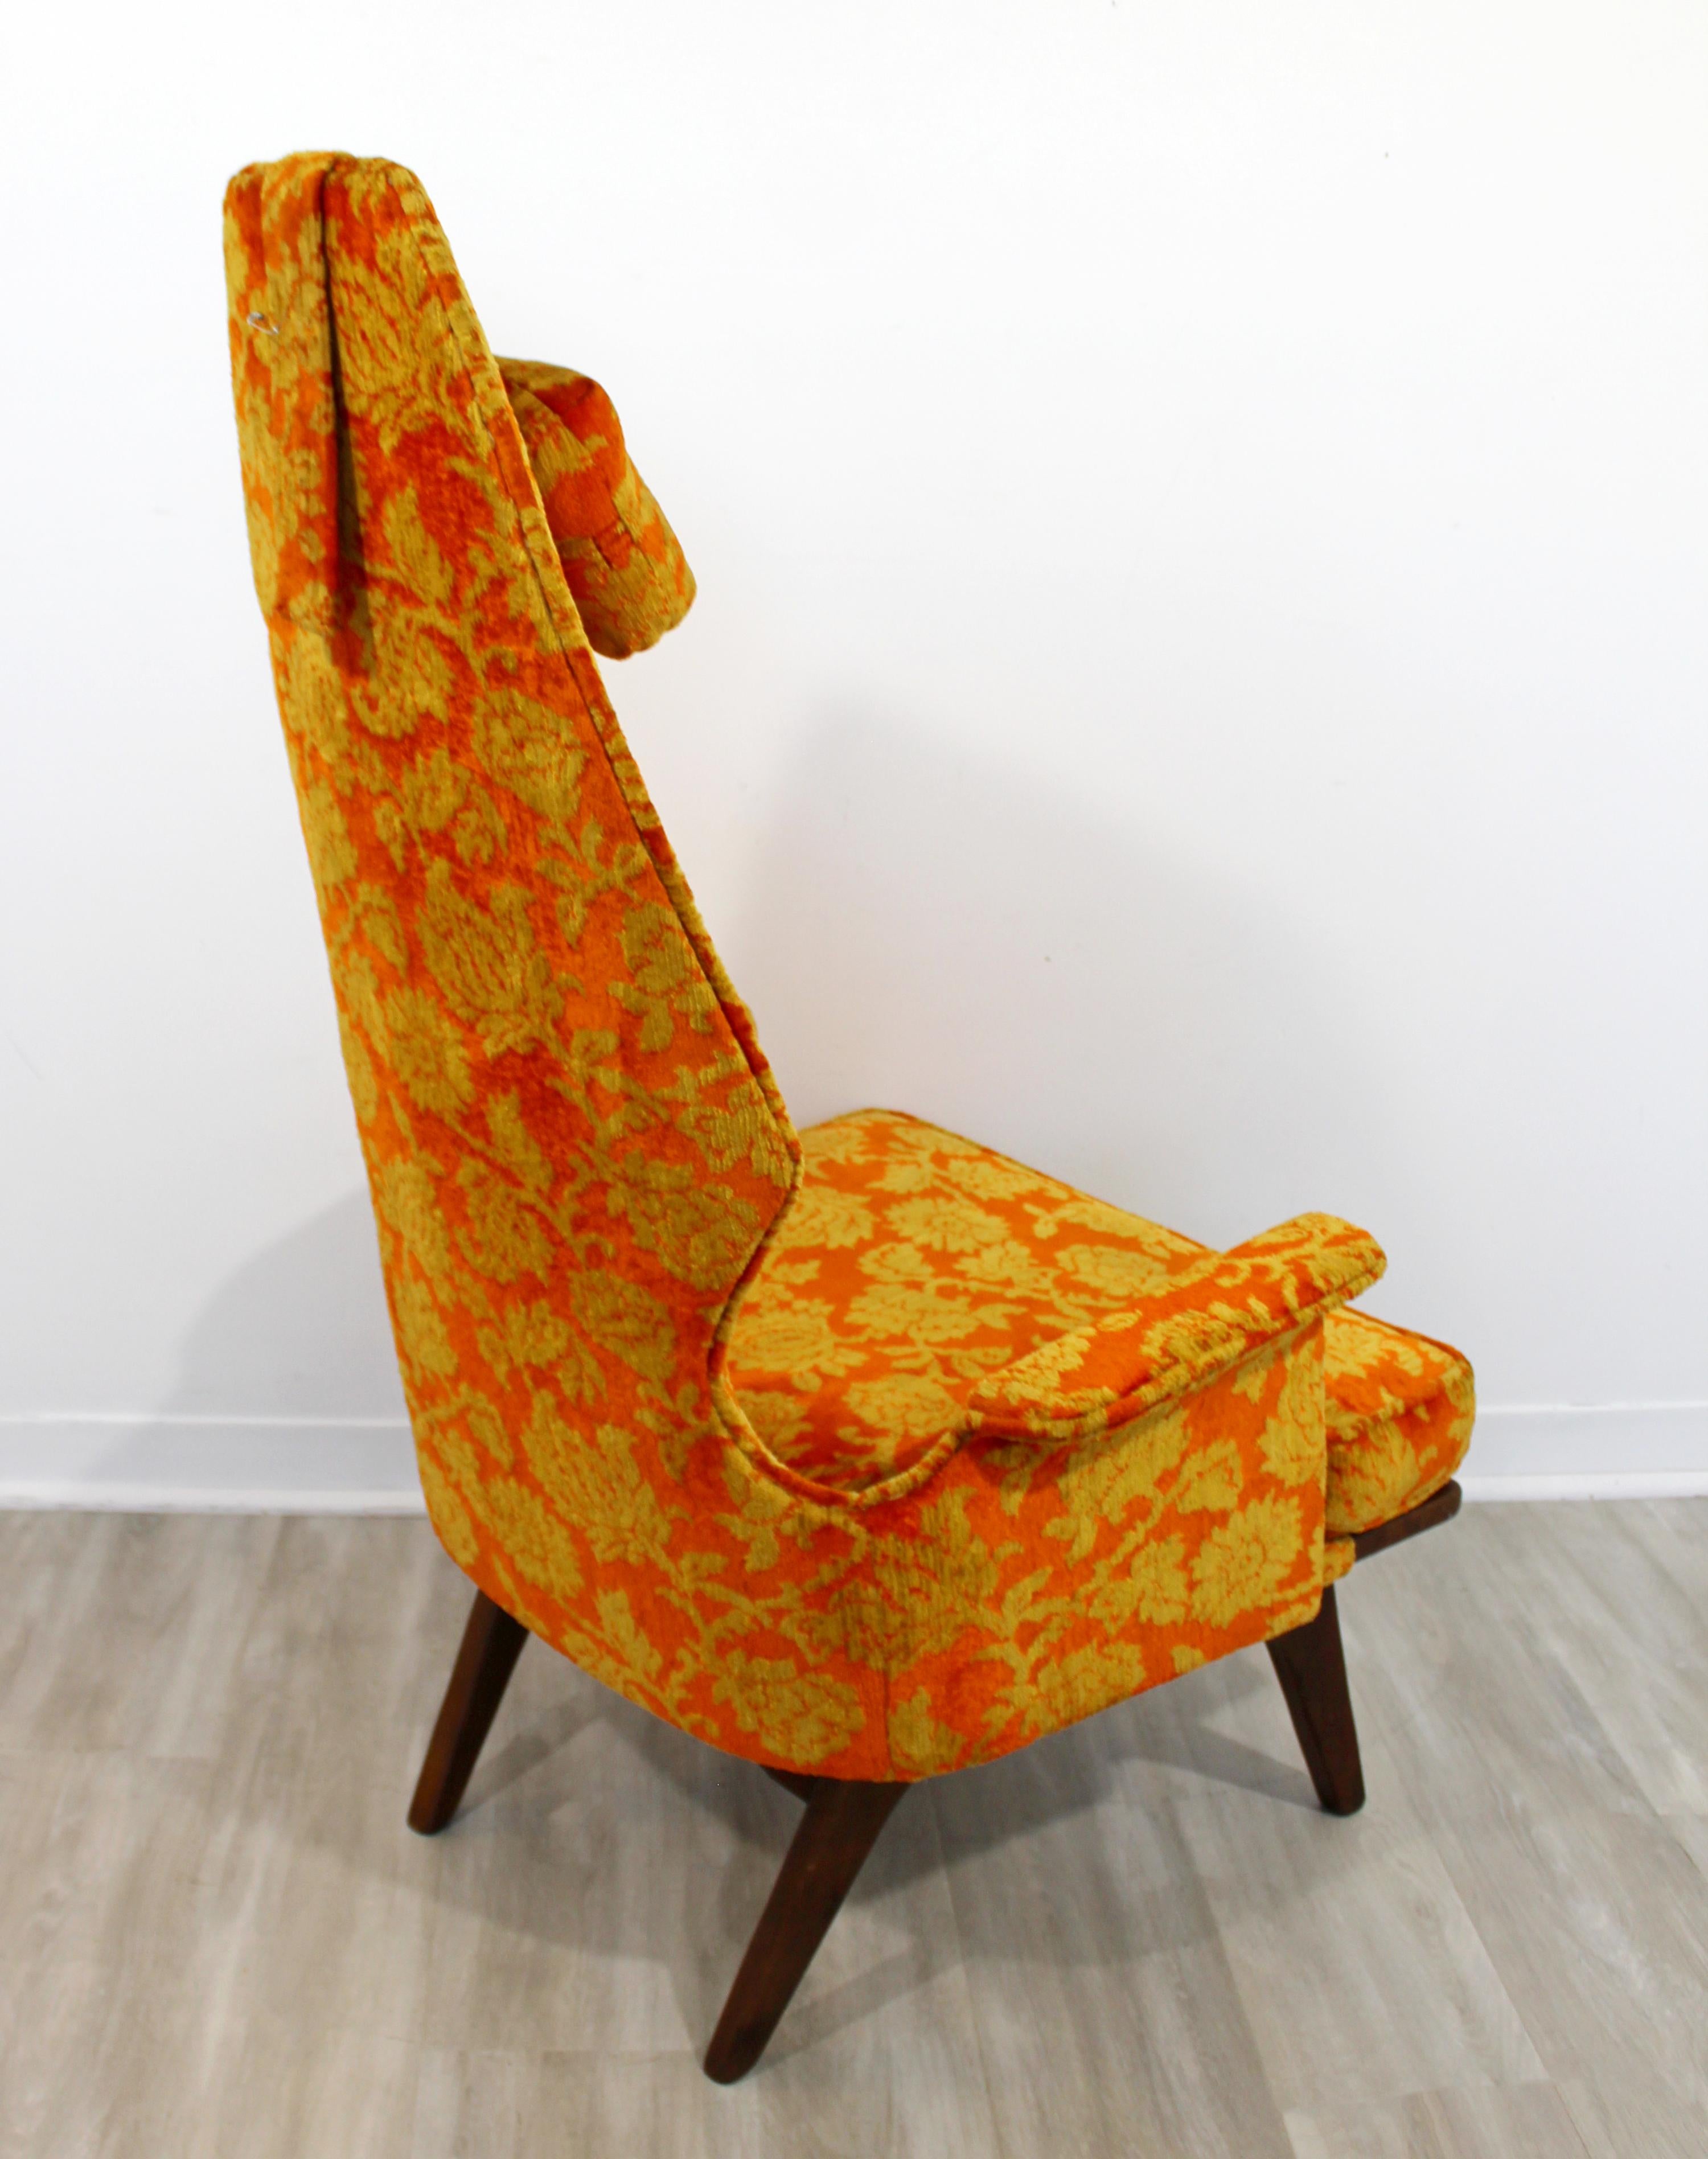 American Mid-Century Modern Vintage Adrian Pearsall High Back Accent Lounge Chair, 1960s